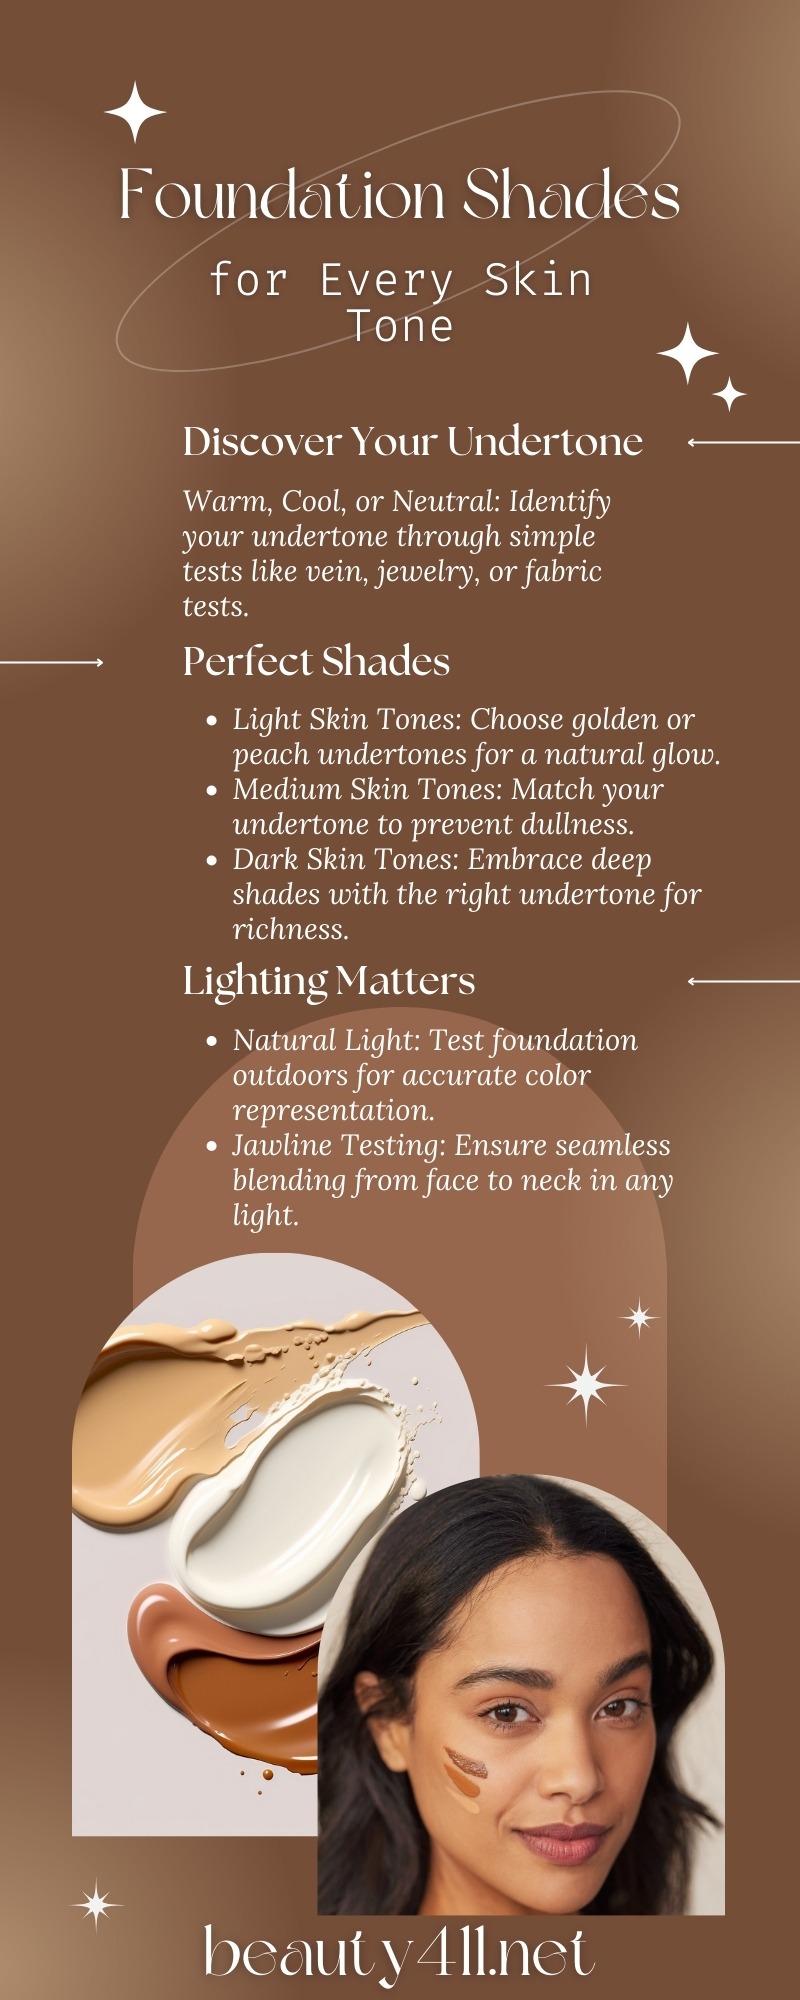 Foundation Shades for Every Skin Tone Infographic